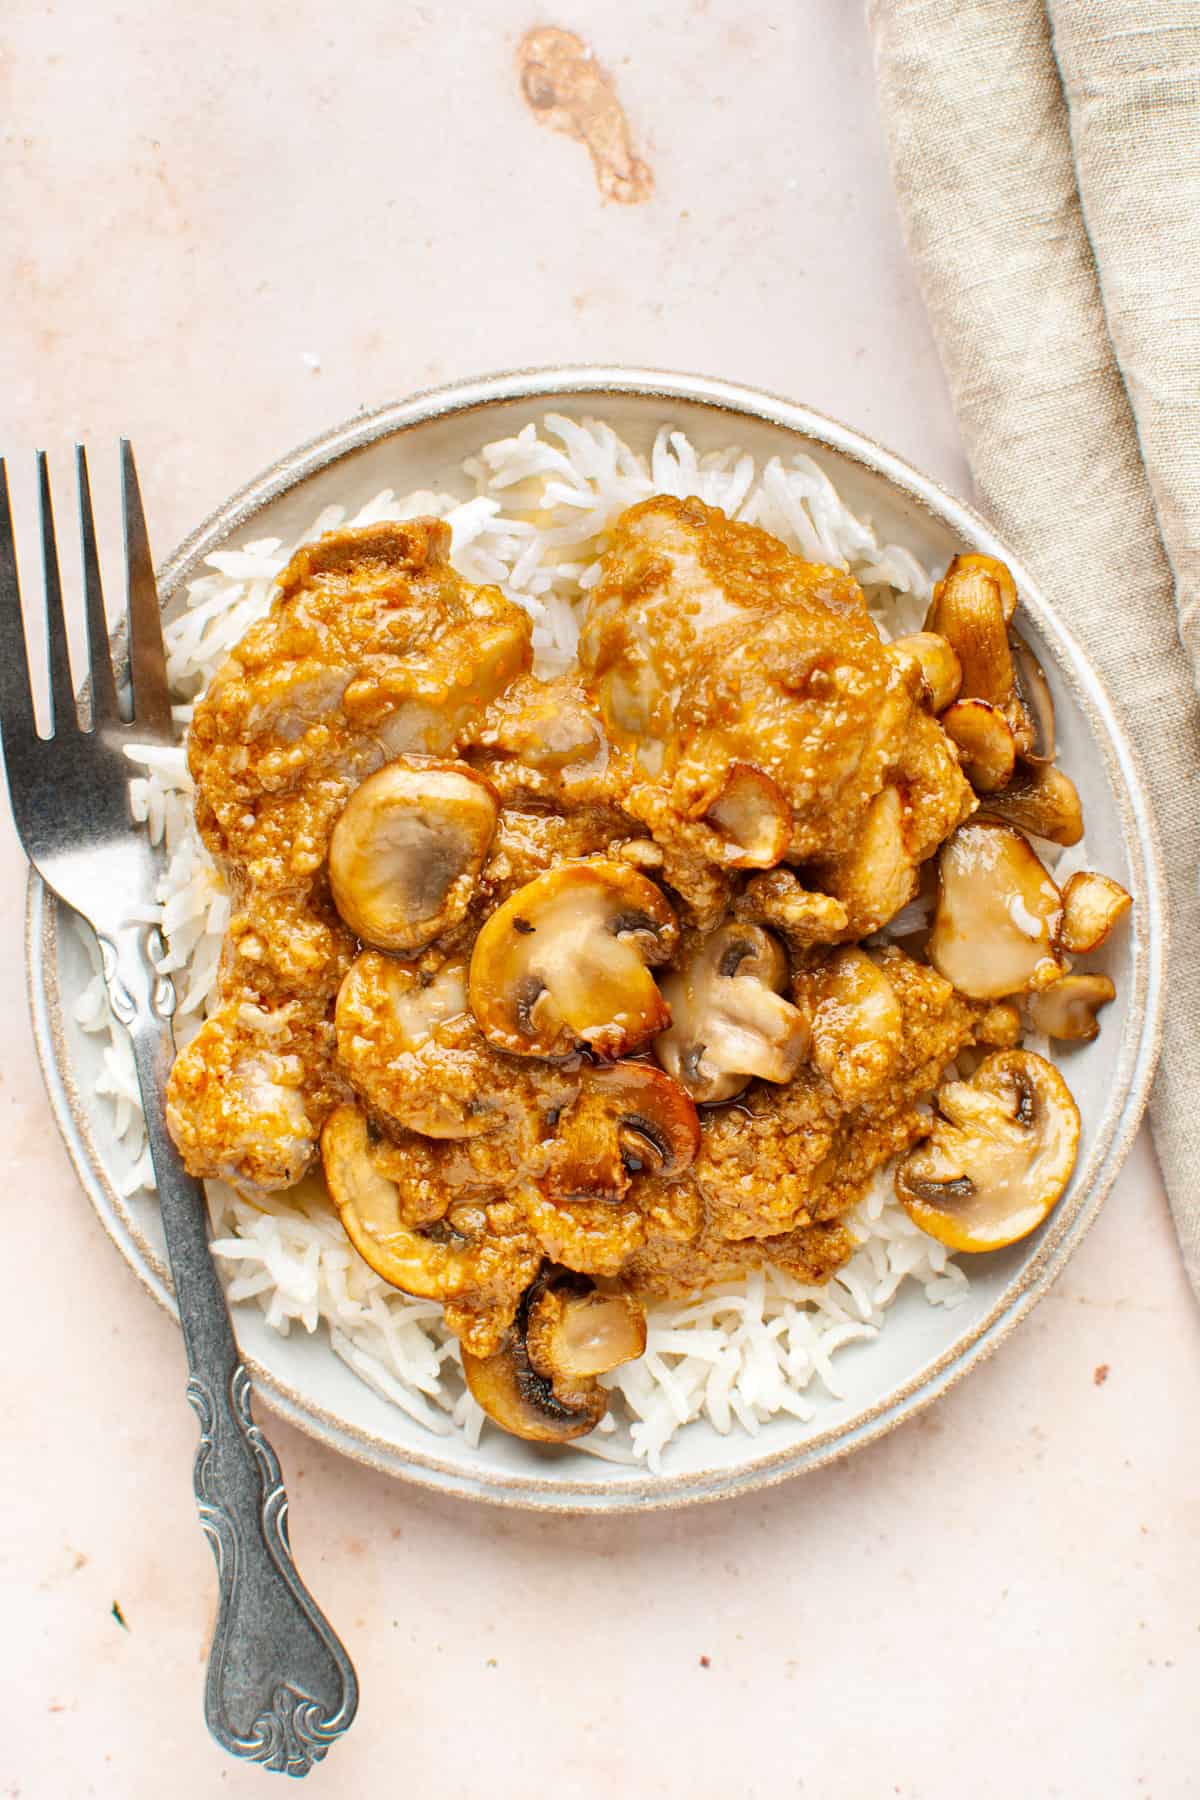 Chicken and mushroom curry over rice in a plate with a fork.